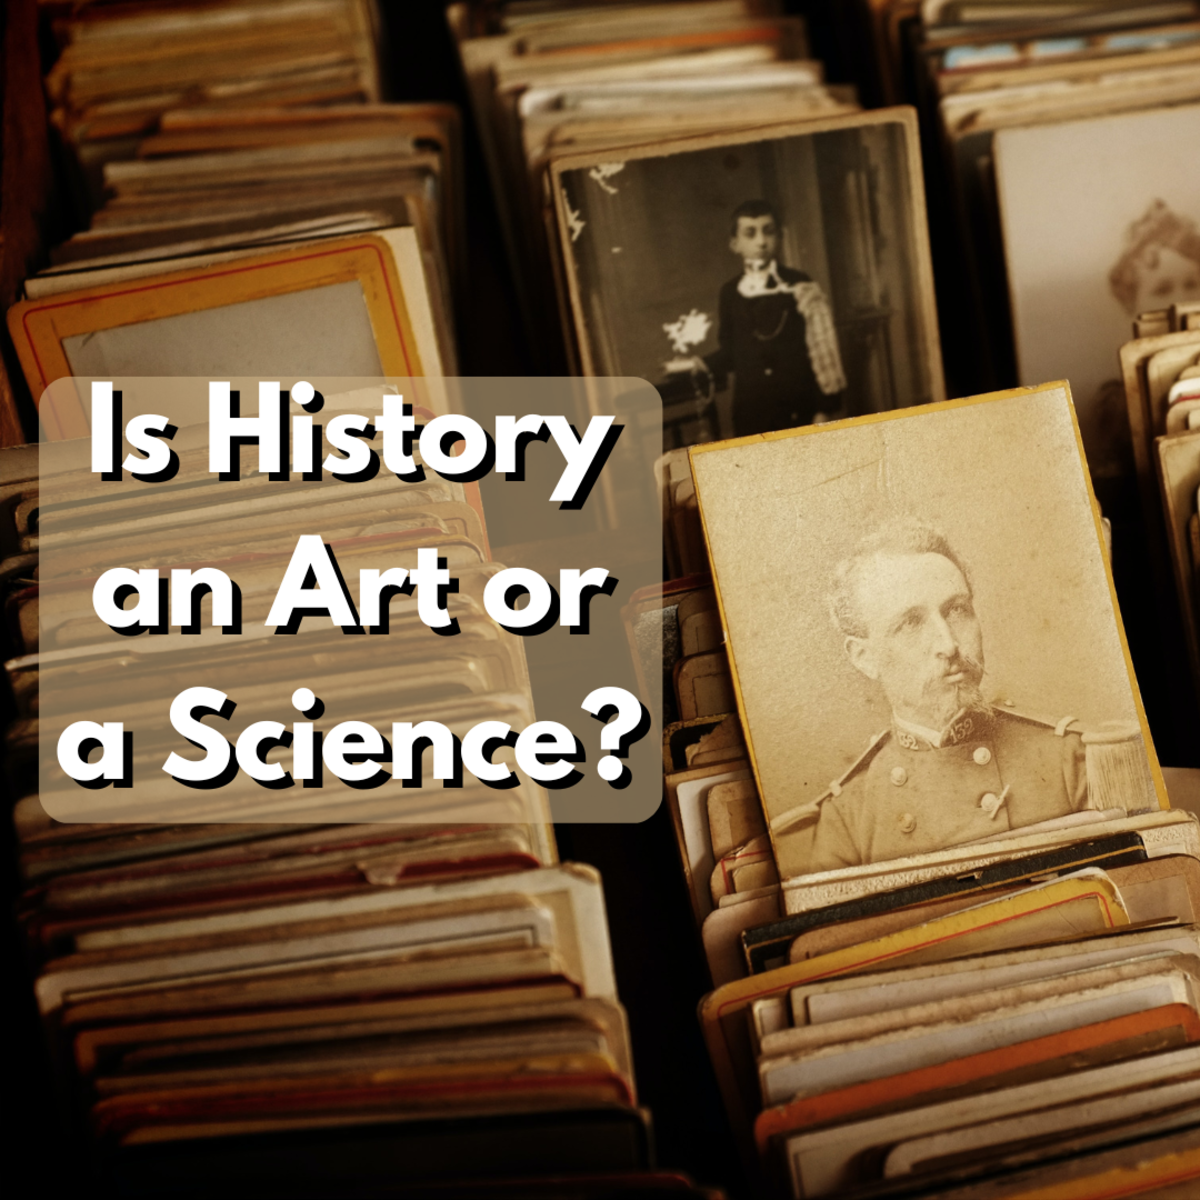 History as Art or Science